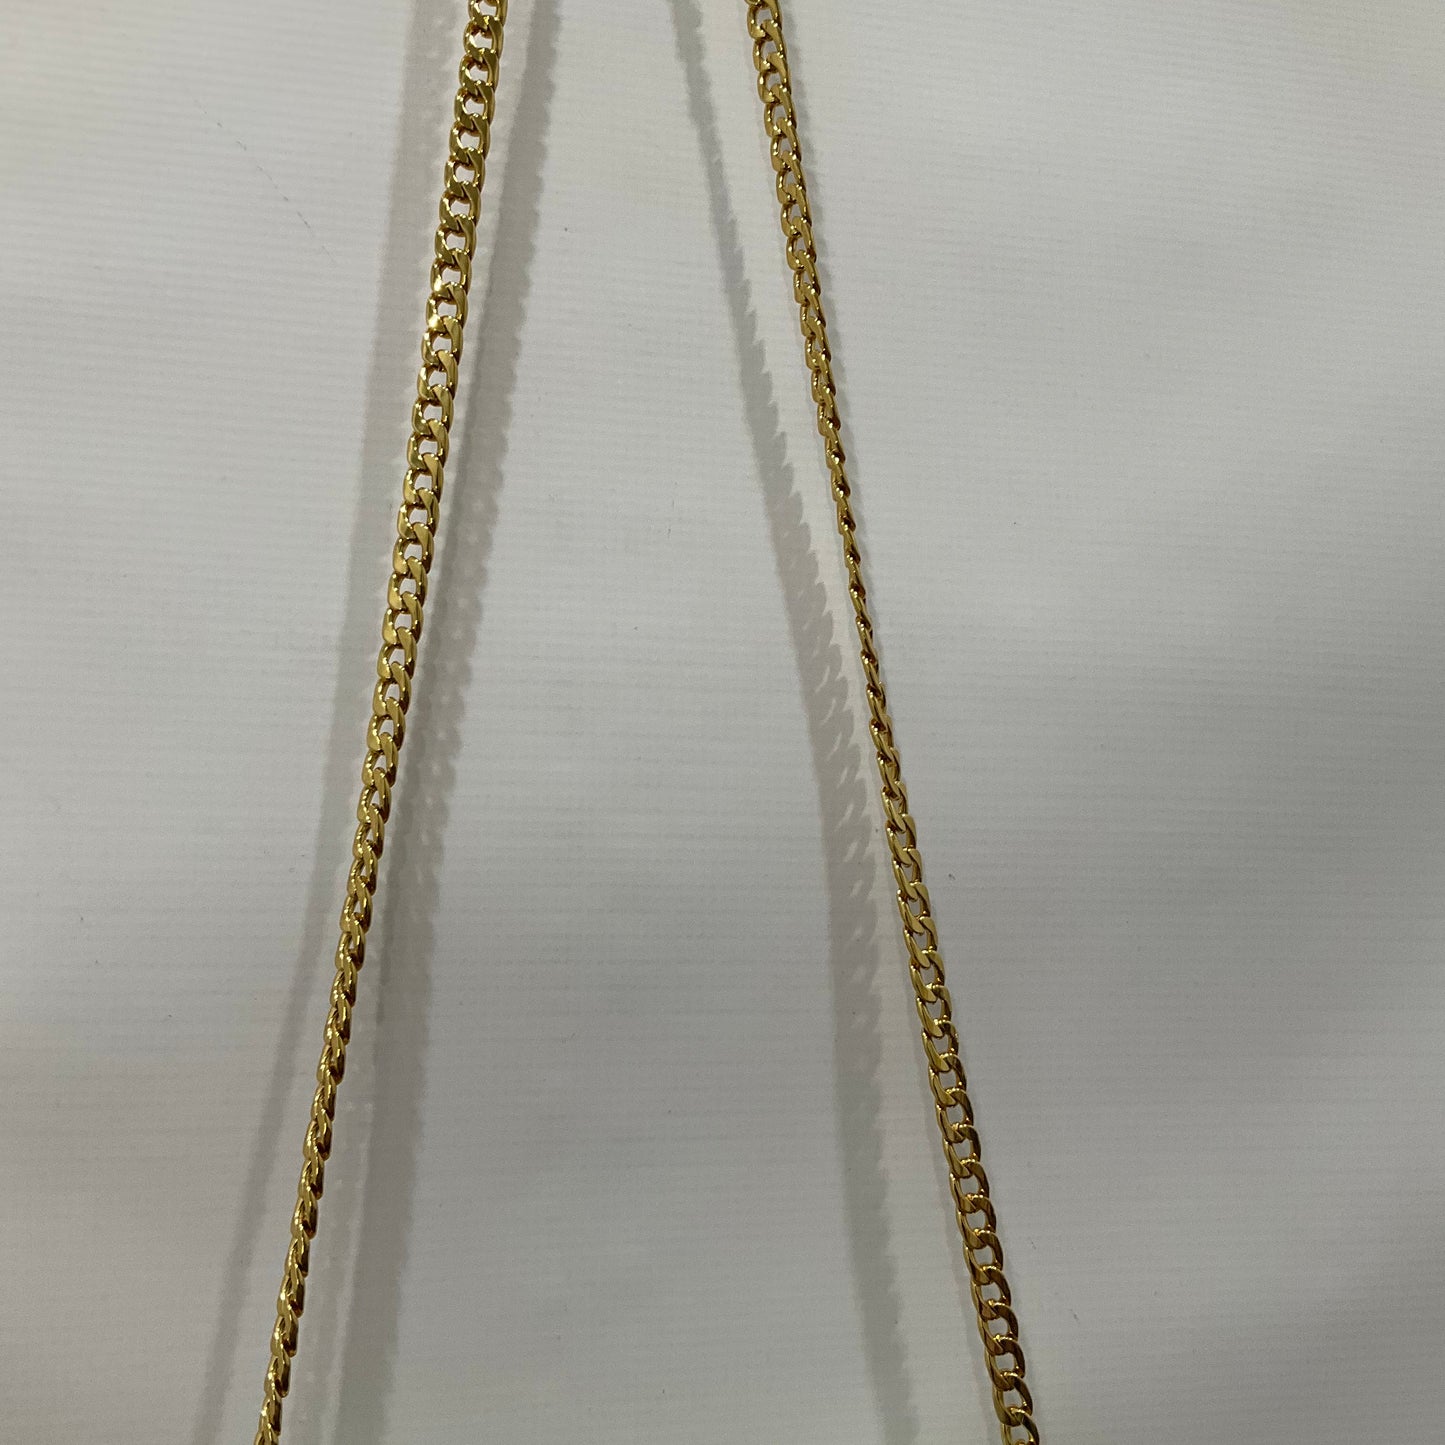 Crossbody Marc Jacobs, Size Small